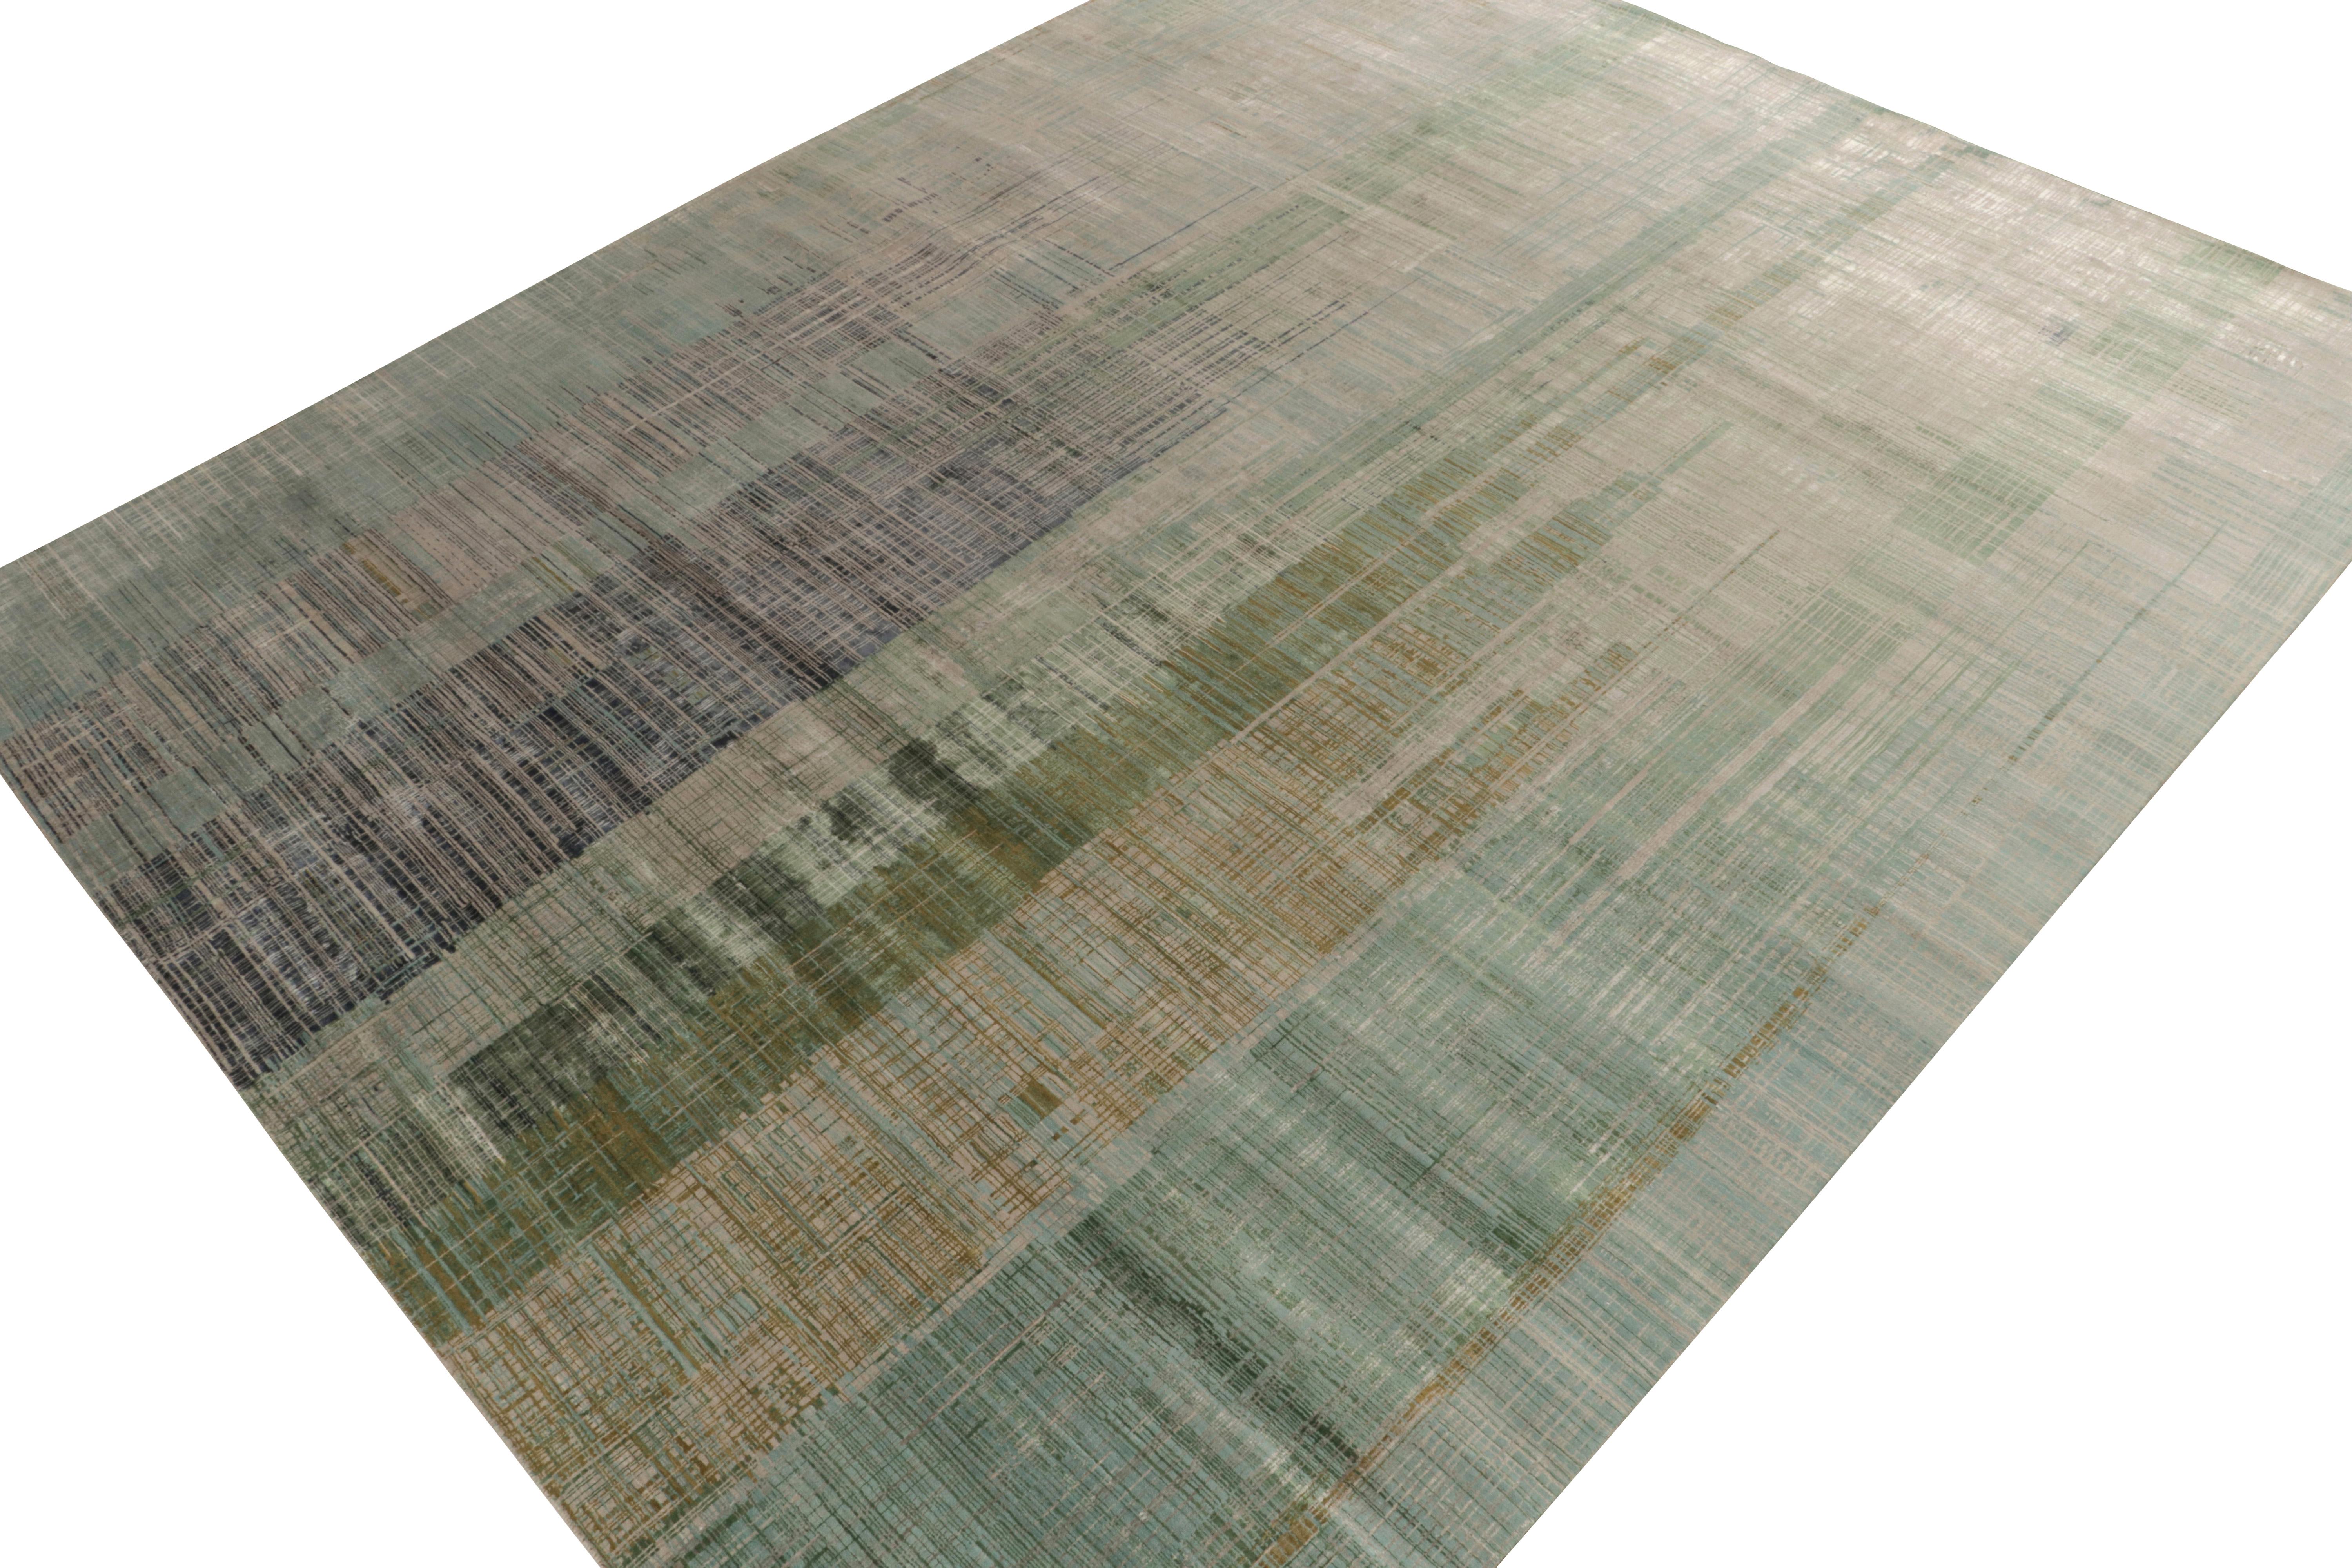 Hand-knotted in fine quality wool & silk, a 12x15 abstract rug showcasing an awe-inspiring vision of modern style. From the newly unveiled works of Rug & Kilim. 

On the Design: The enticing play of blue, green, gray and beige tones move